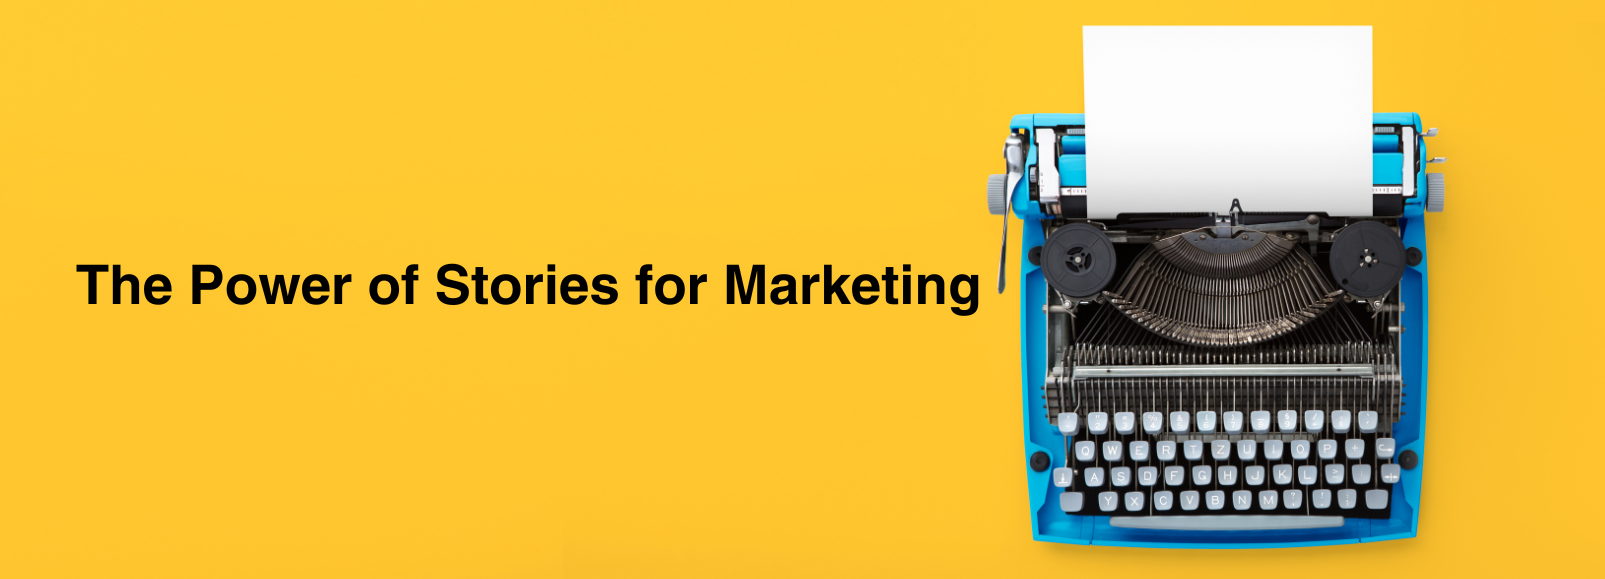 The-Power-of-Stories-for-Marketing-Bold-Entity